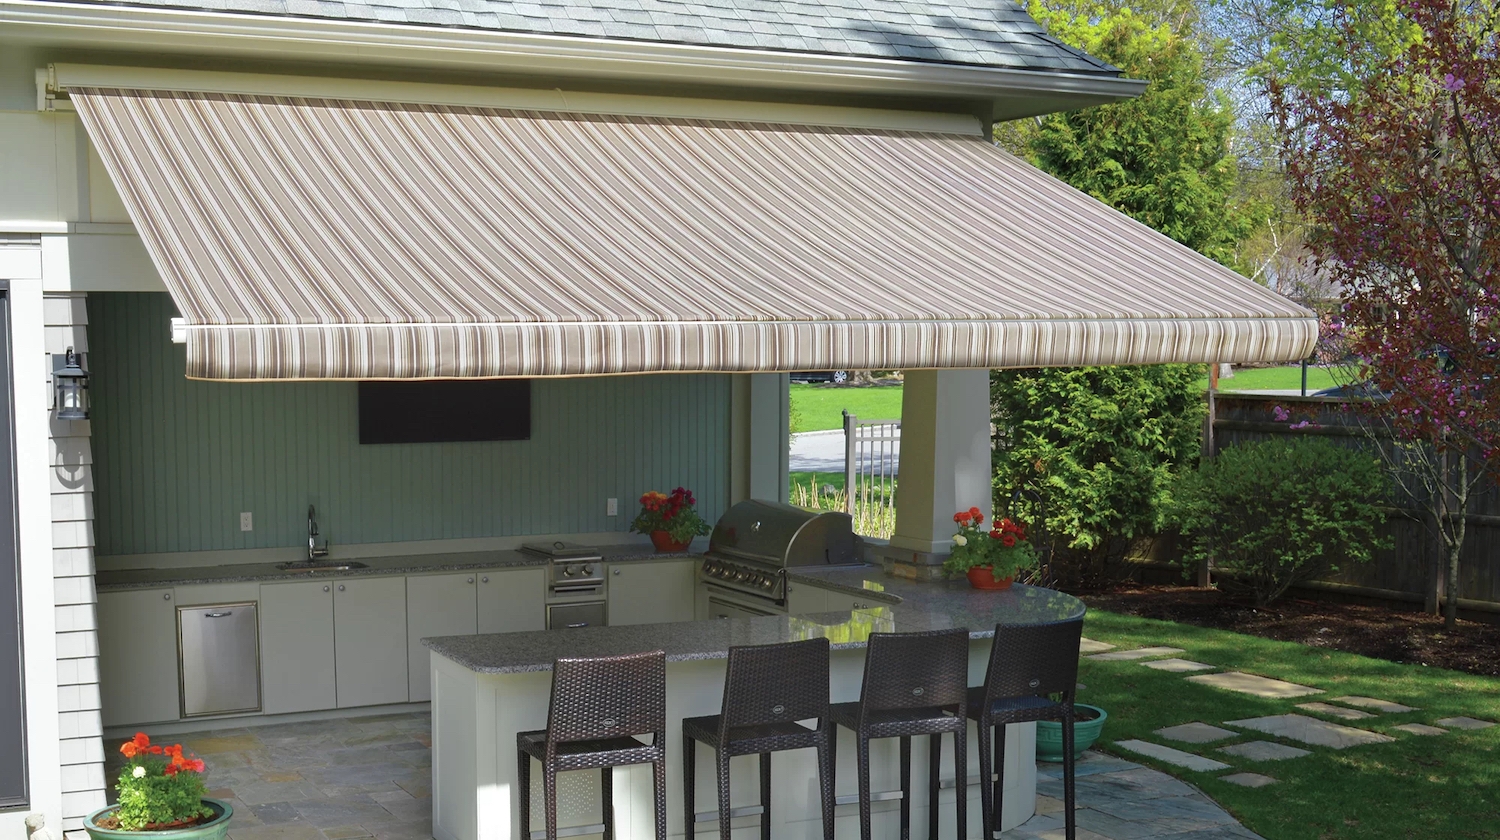 Enhance your new jersey home with a sunsetter awnings installation